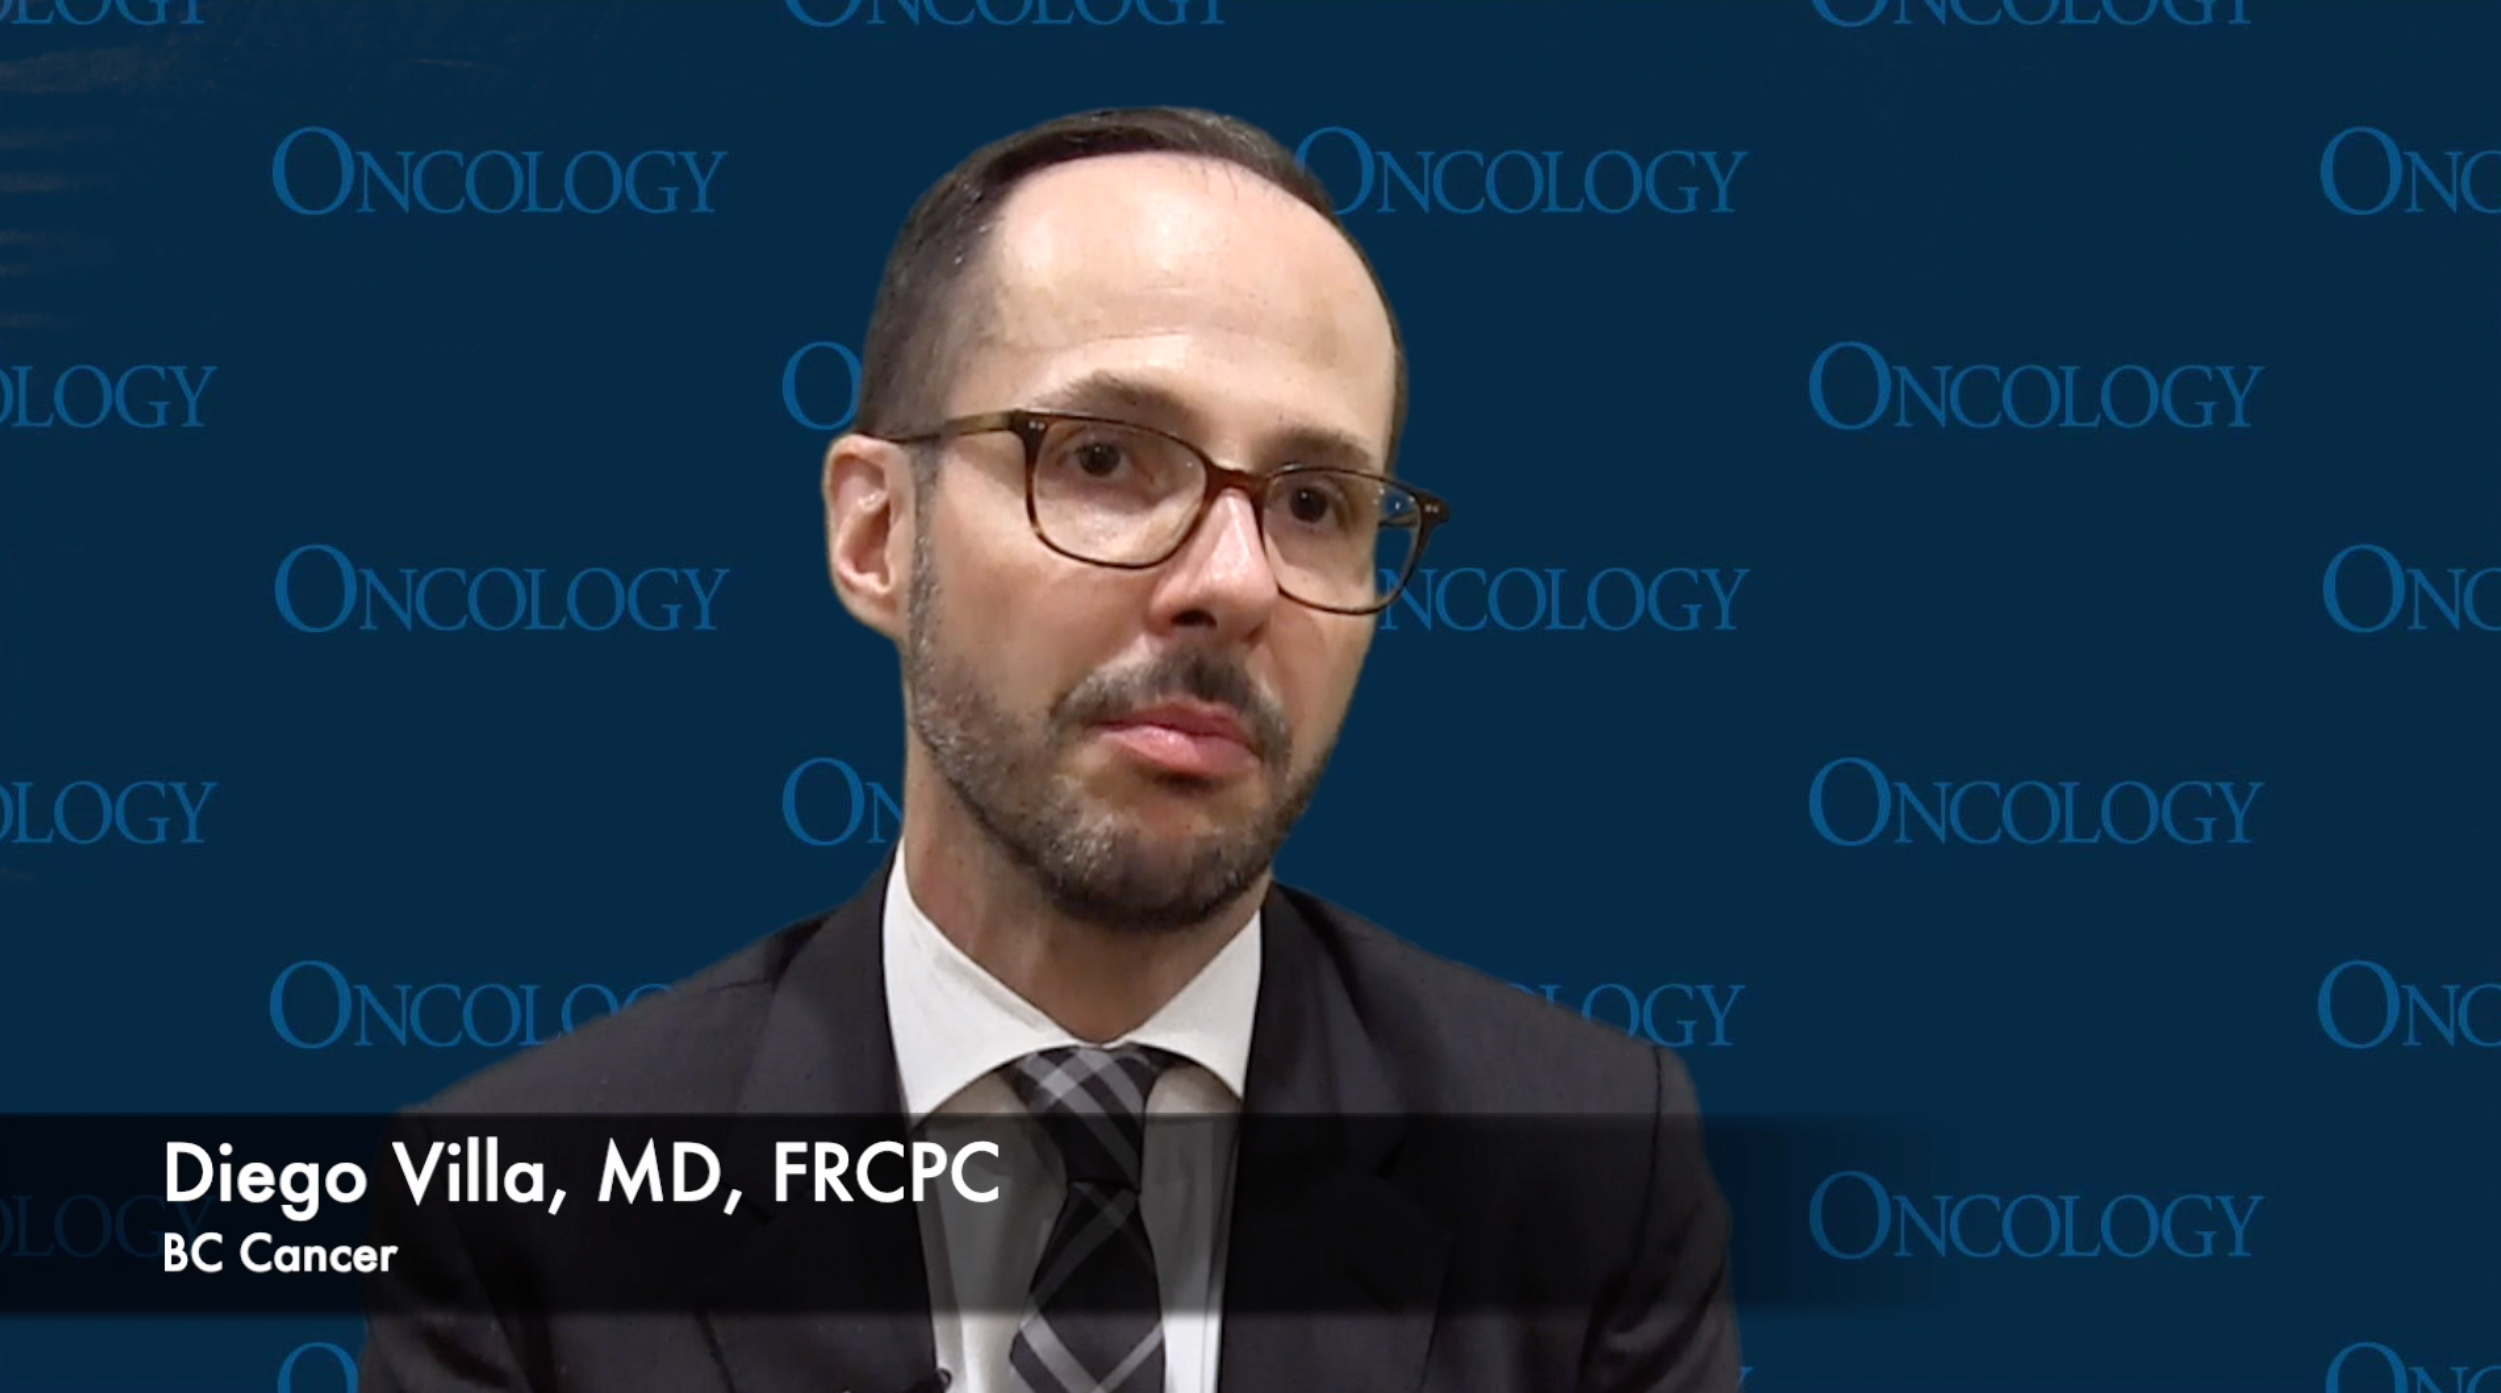 Diego Villa, MD, FRCPC, Discusses Bendamustine and Rituximab as Induction Therapy in MCL